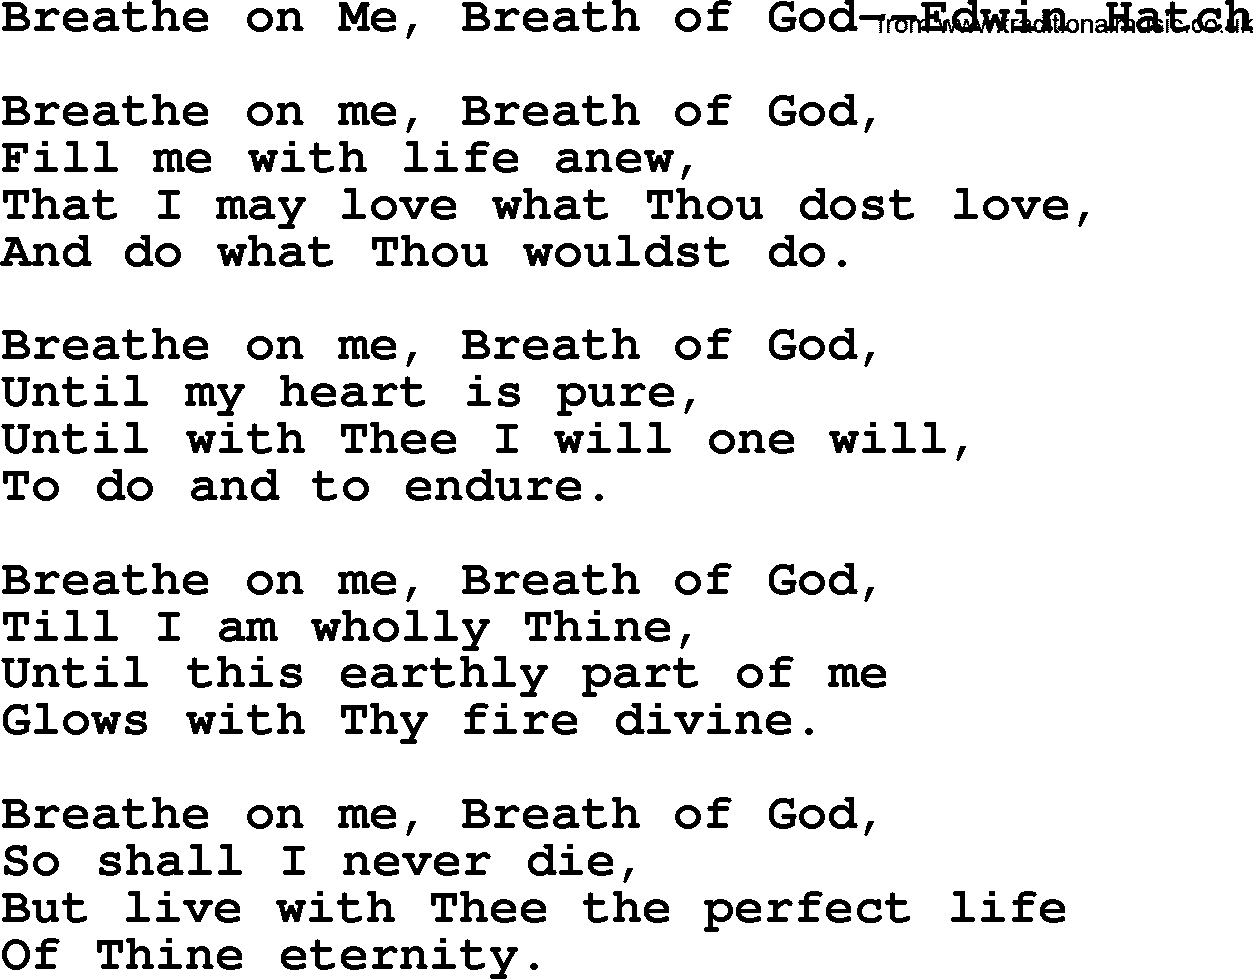 Baptism and Christening Hymns and Songs, Hymn: Breathe On Me, Breath Of God-Edwin Hatch, lyrics and PDF